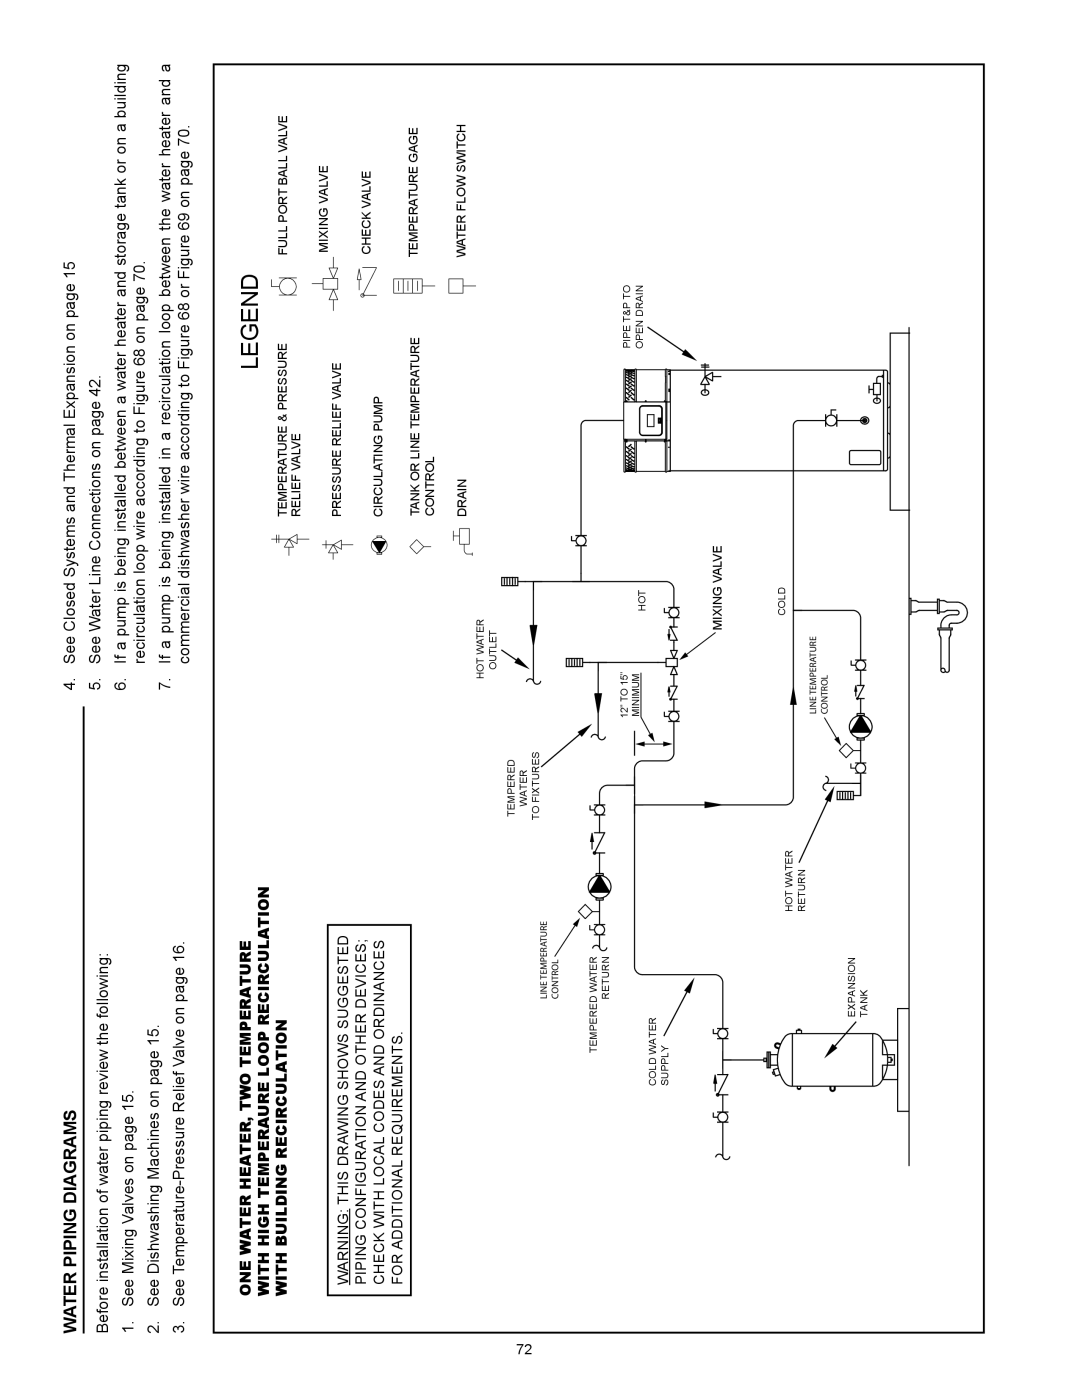 State Industries SUF-60-120, SUF-100-250 Water Piping Diagrams, Line Temperature Control, 12” TO 15” MINIMUMHOT, Cold 